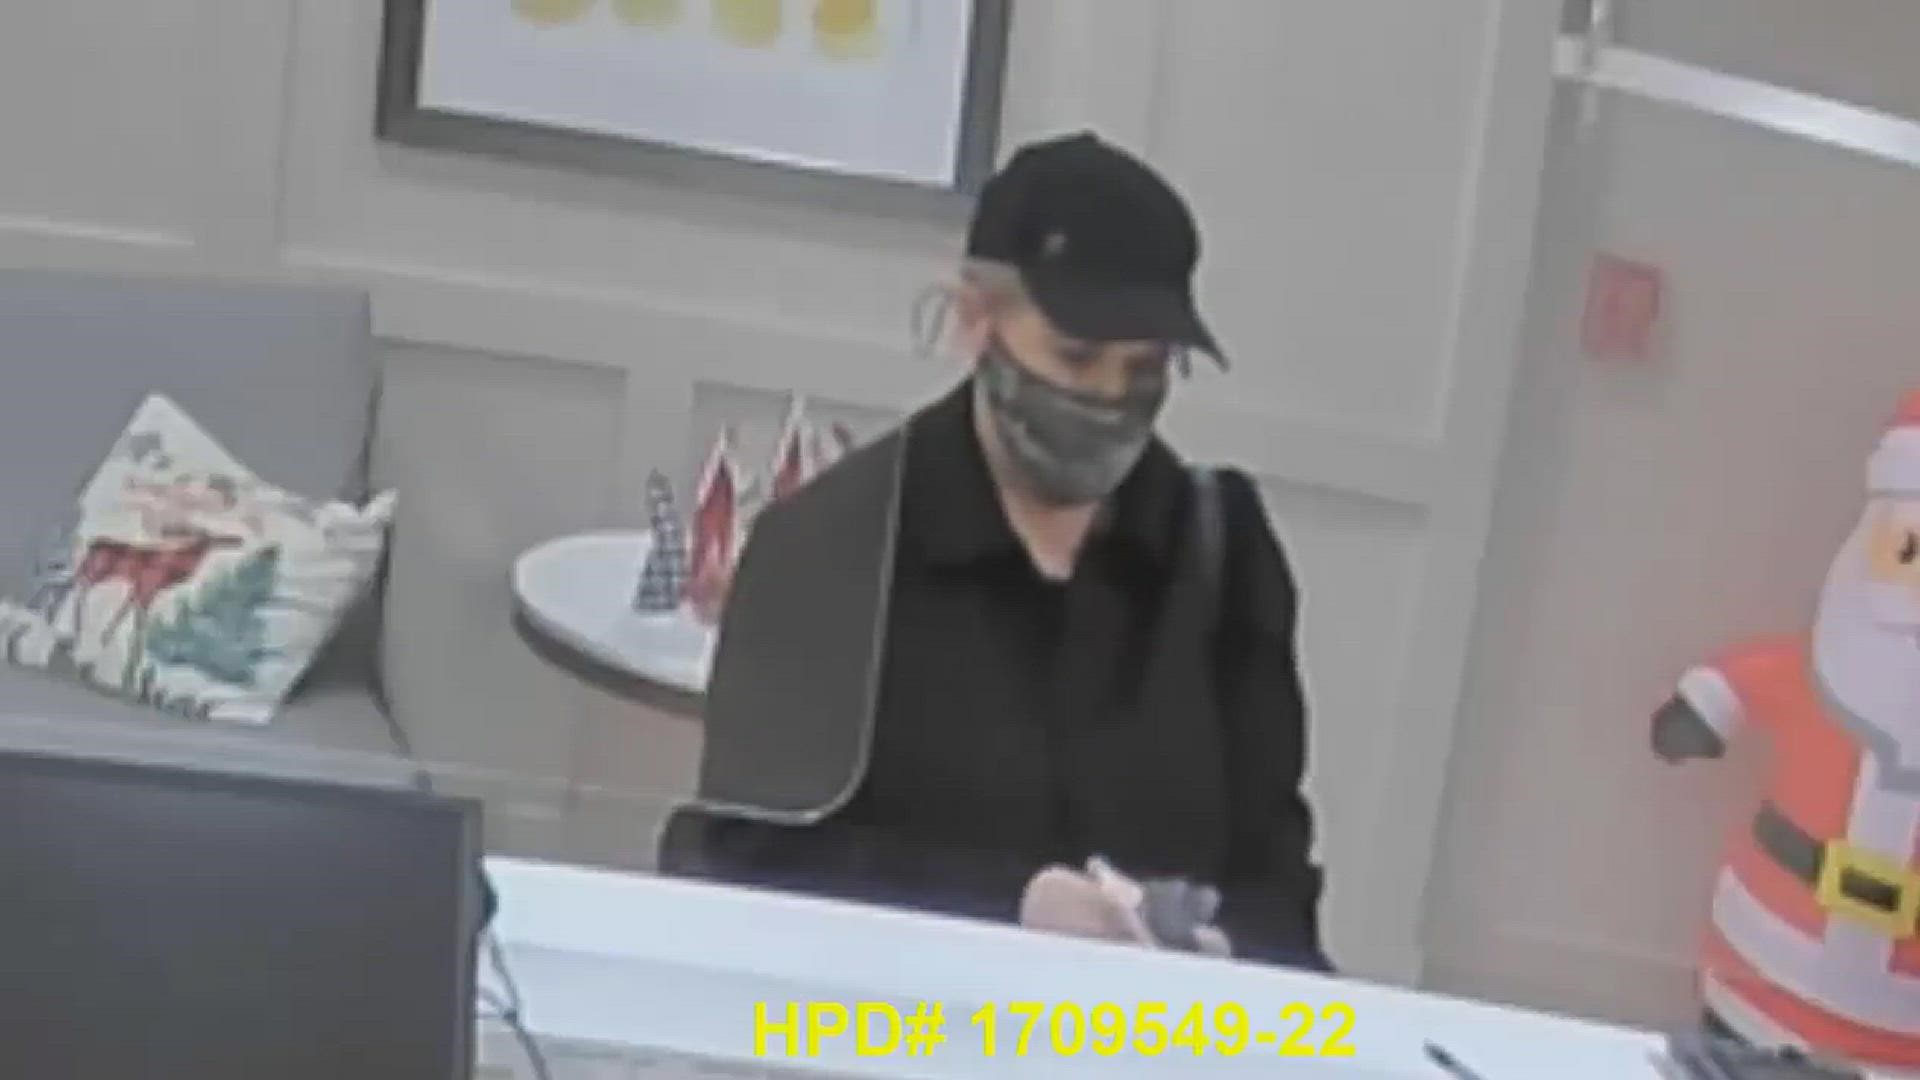 The woman, 40 to 50 years old, wore a mask, high heels and a black ballcap that covered her gray or blonde hair, according to the Houston Police Department.